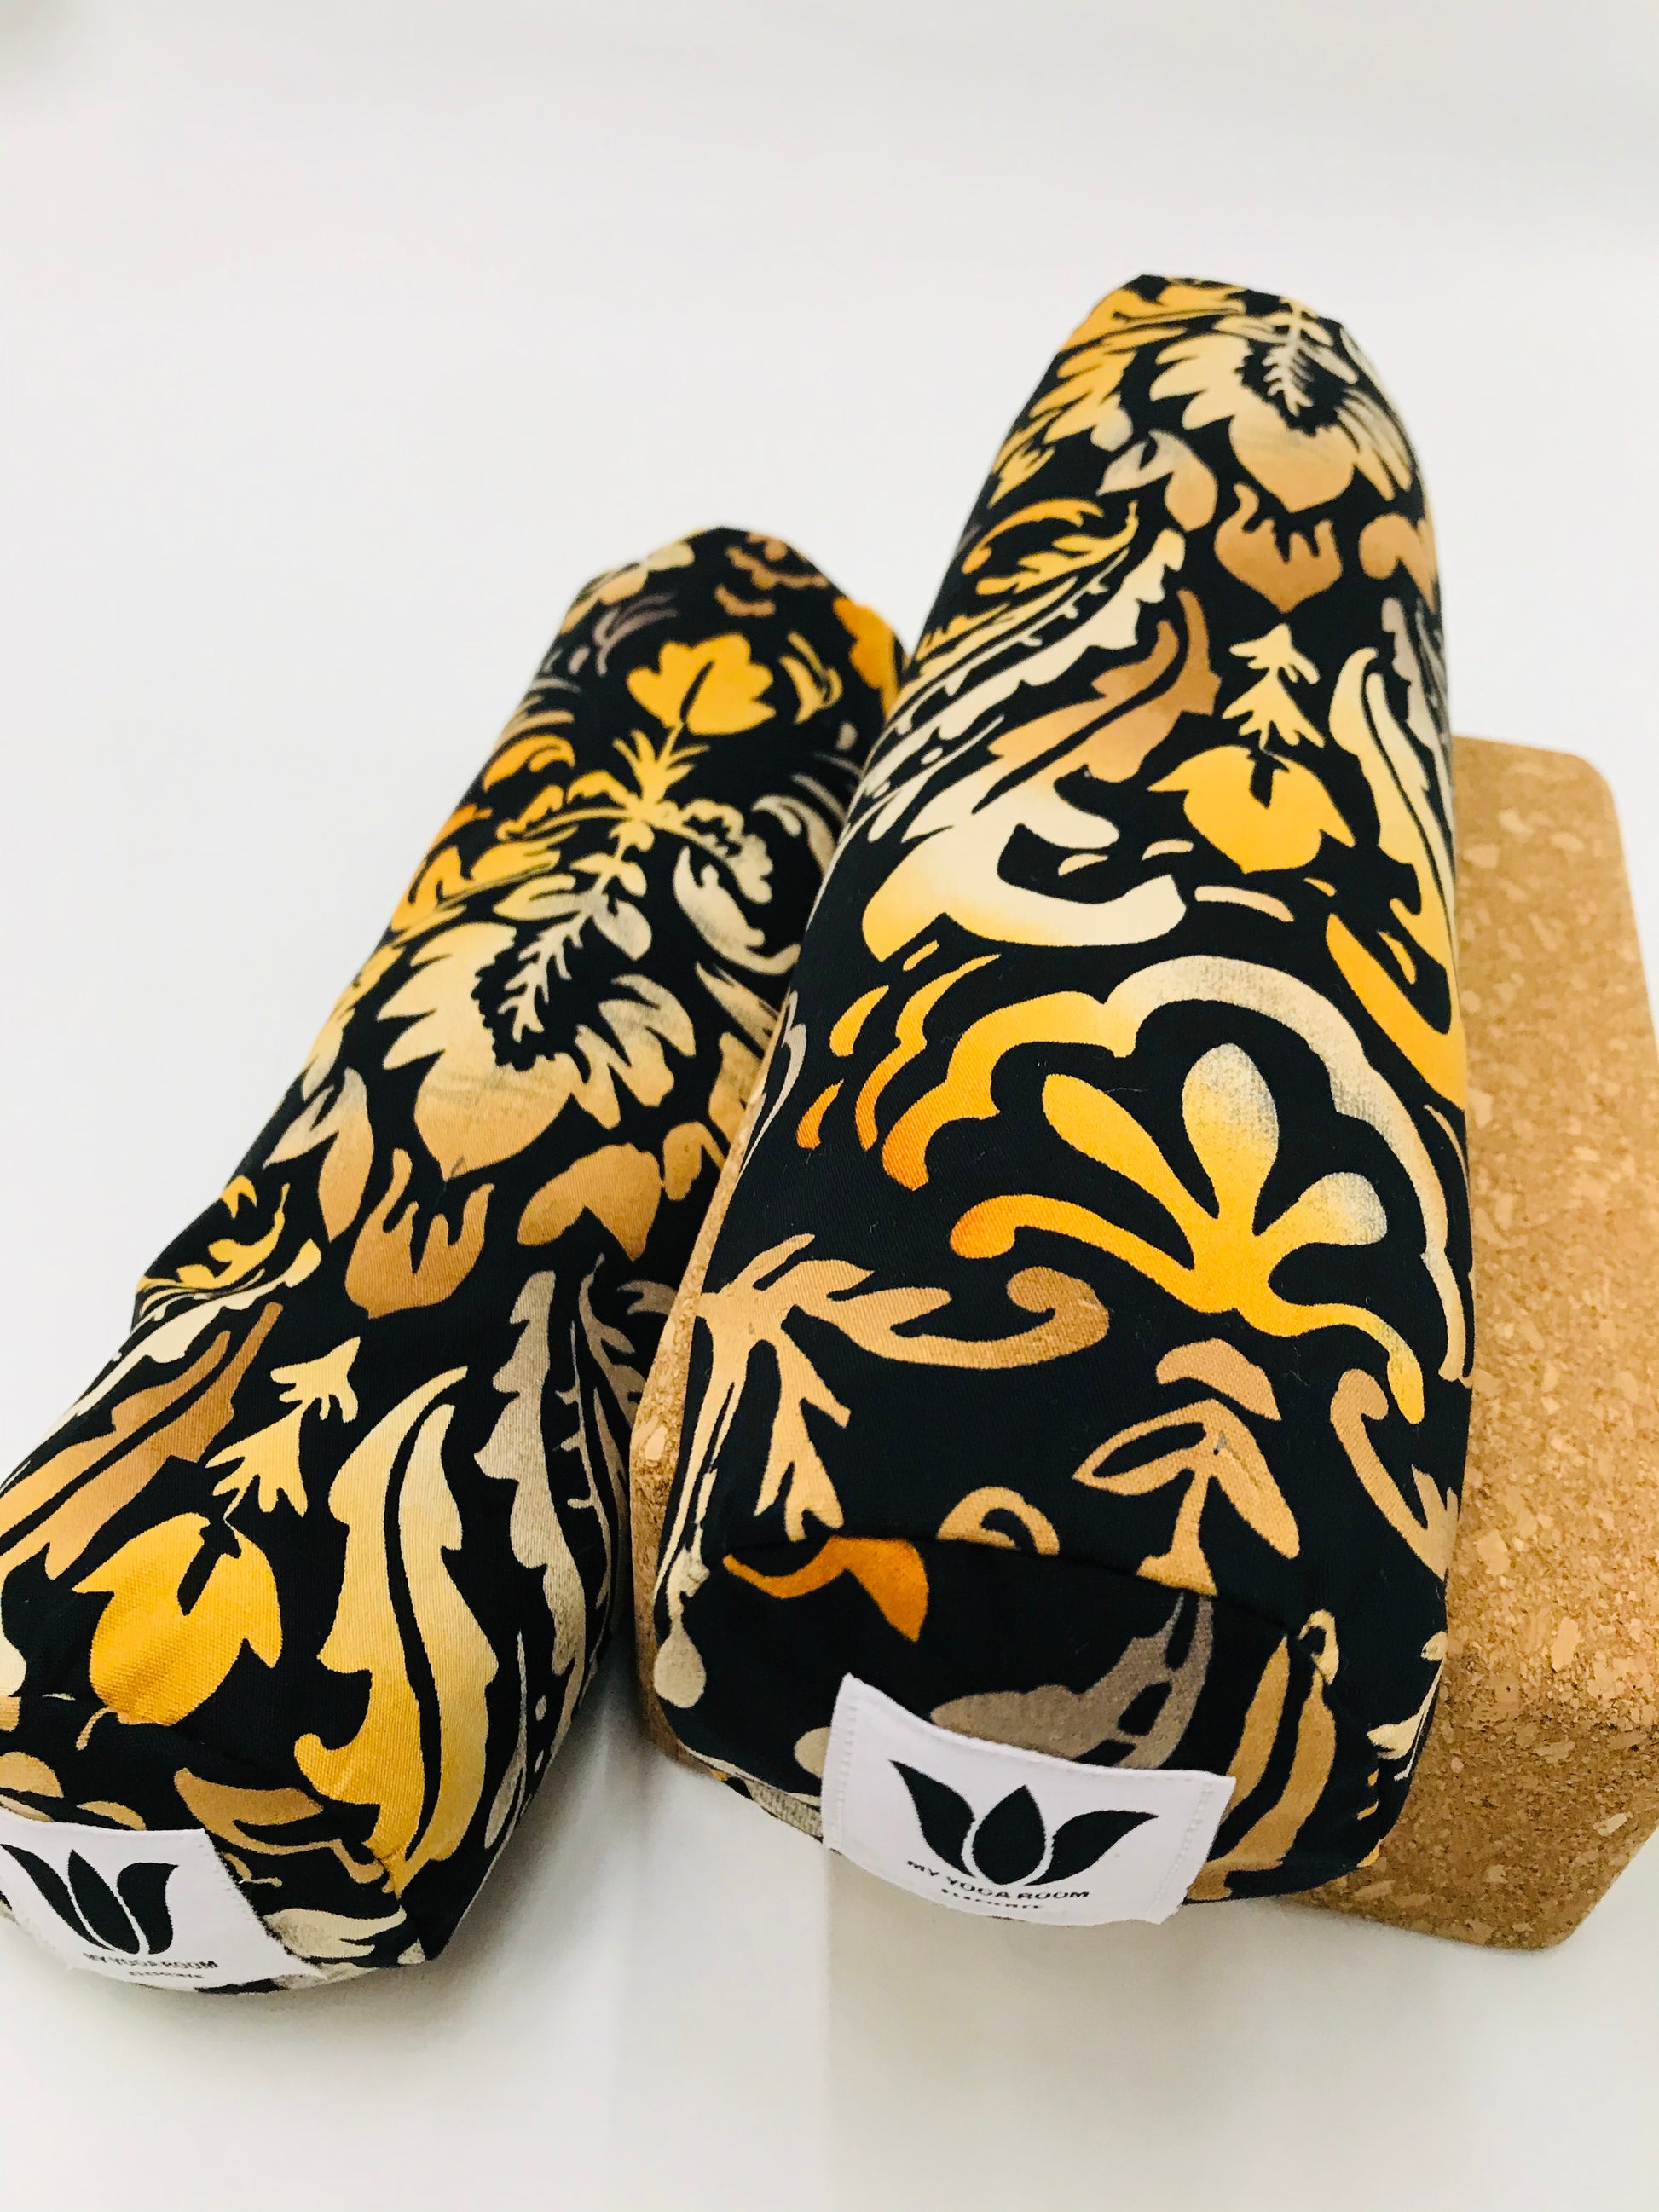 Mini yoga bolster in durable fabric, black and orange damask print fabric. Cushion and support the body in the practice of yoga and meditation.Removeable cover. Made in Canada by My Yoga Room Elements